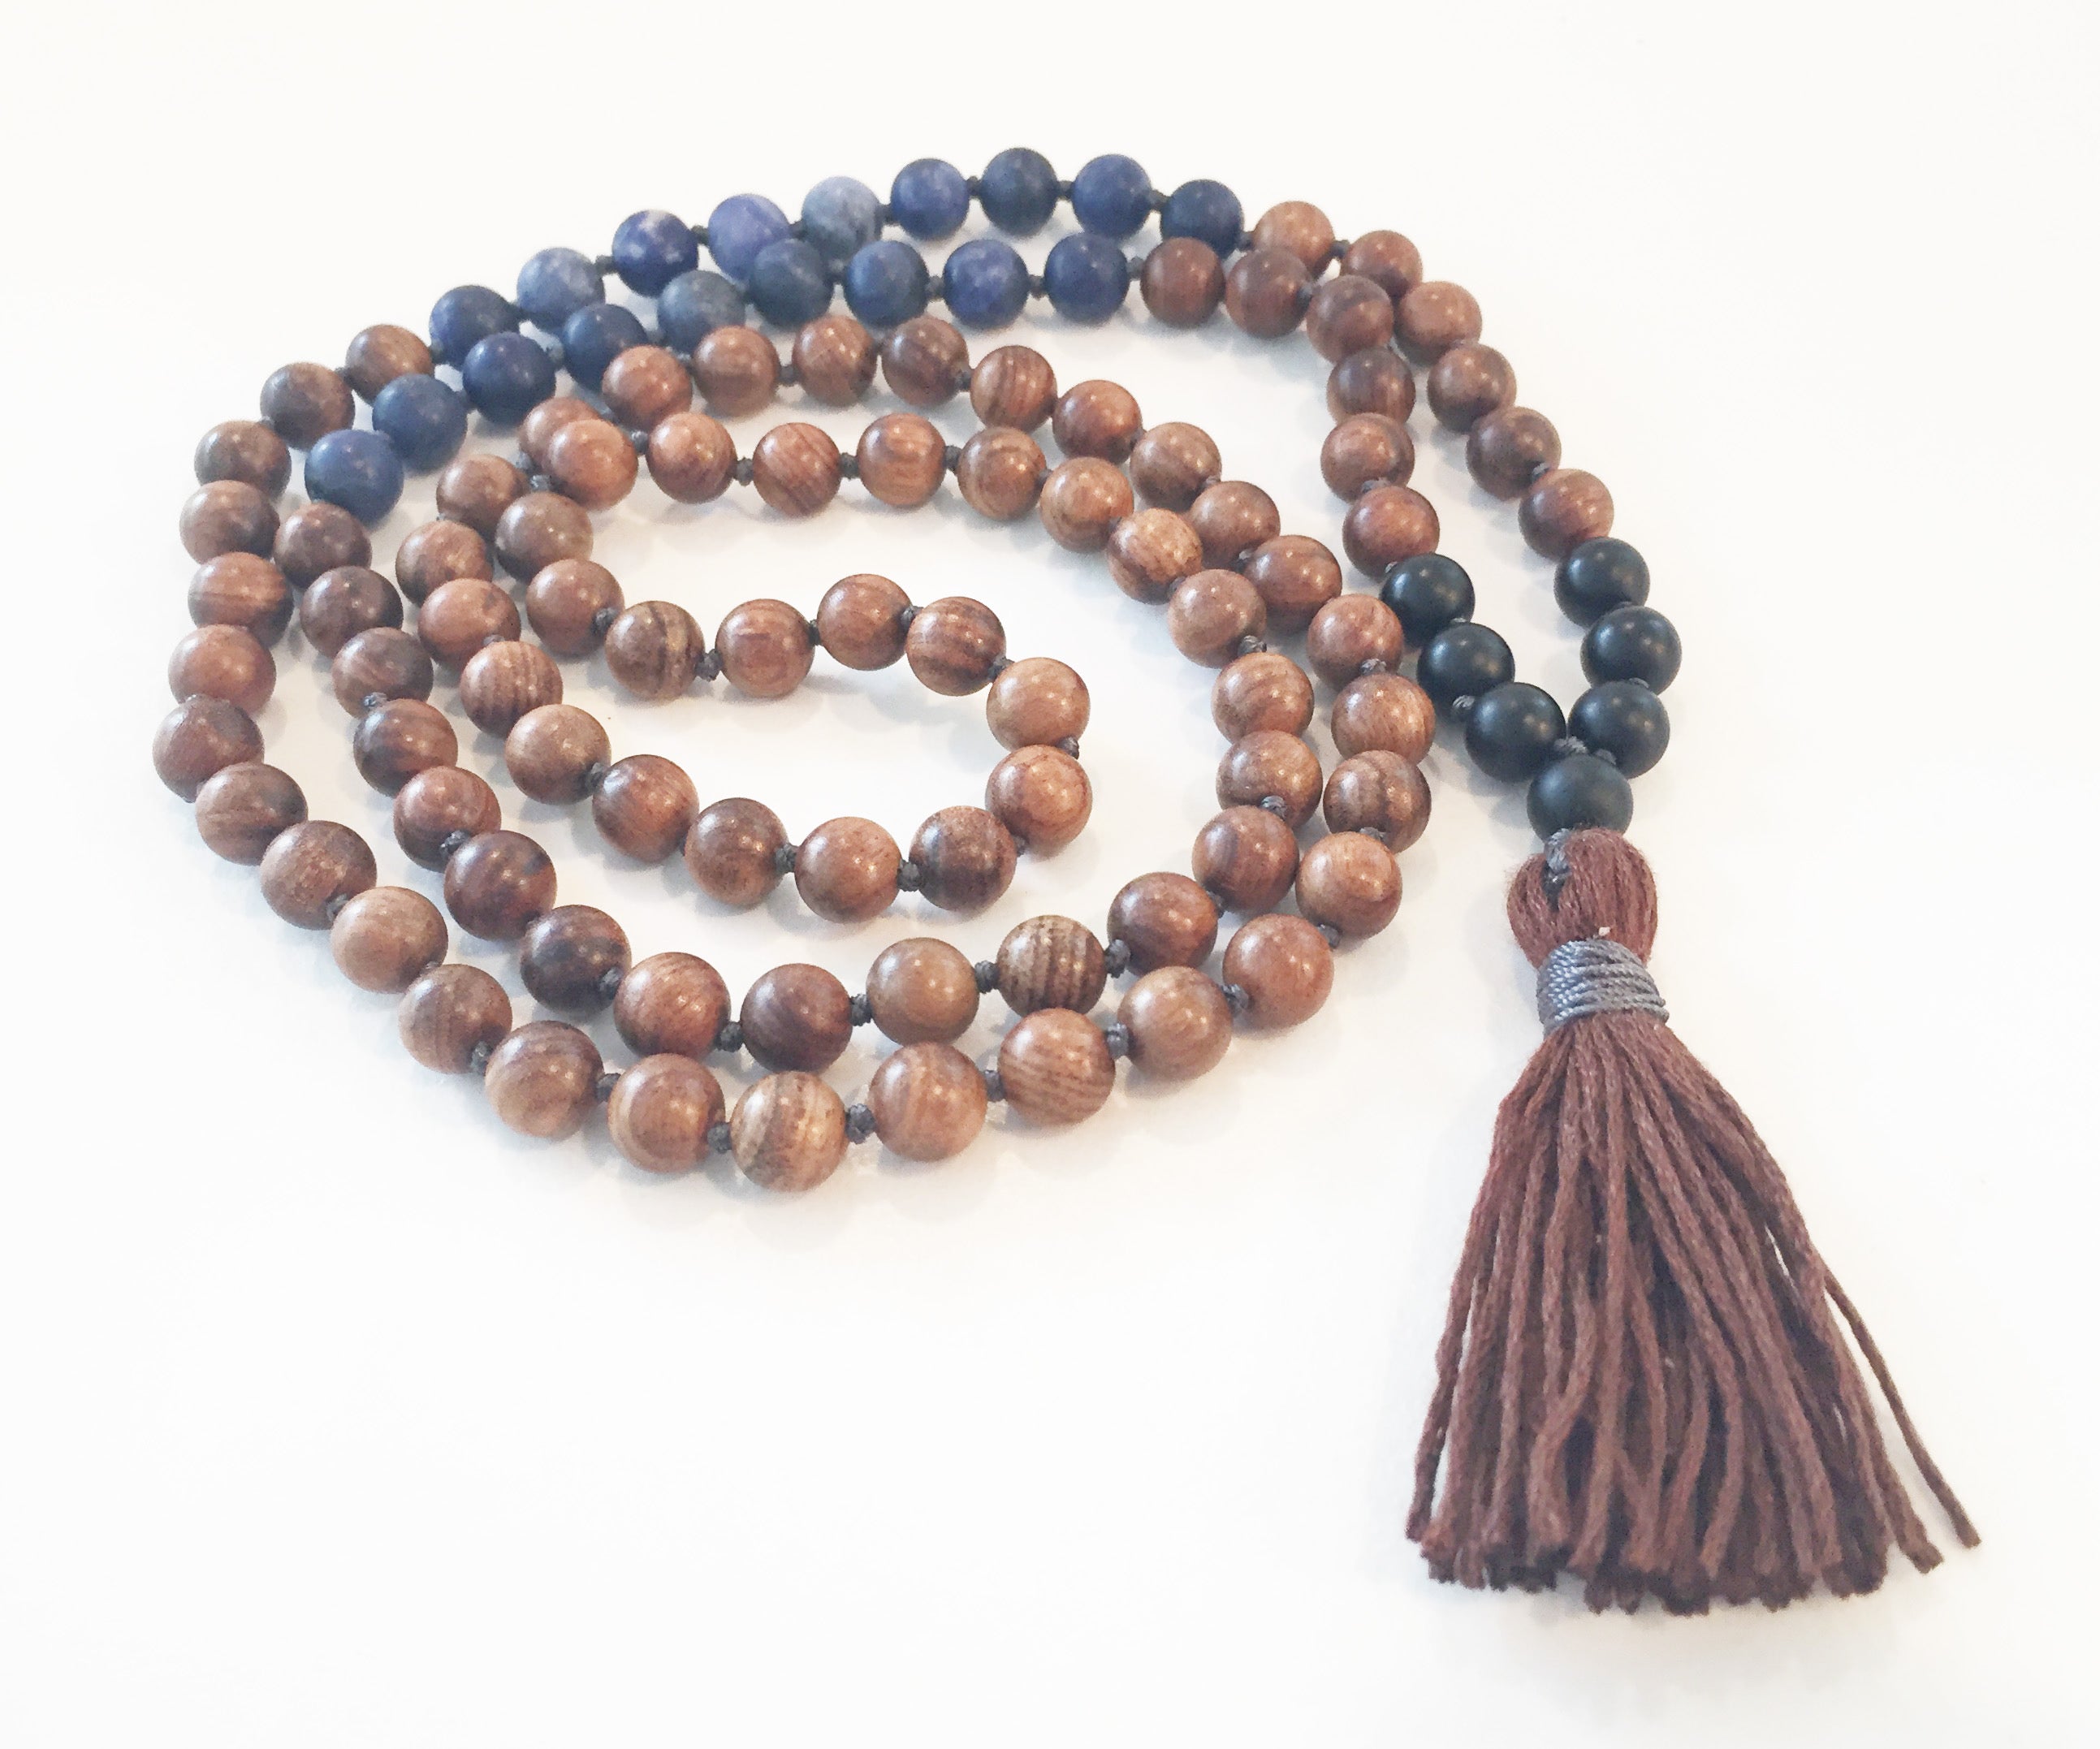 8mm Pear Wood & Matte Sodalite 108 Knotted Mala Necklace with Colored Tassel